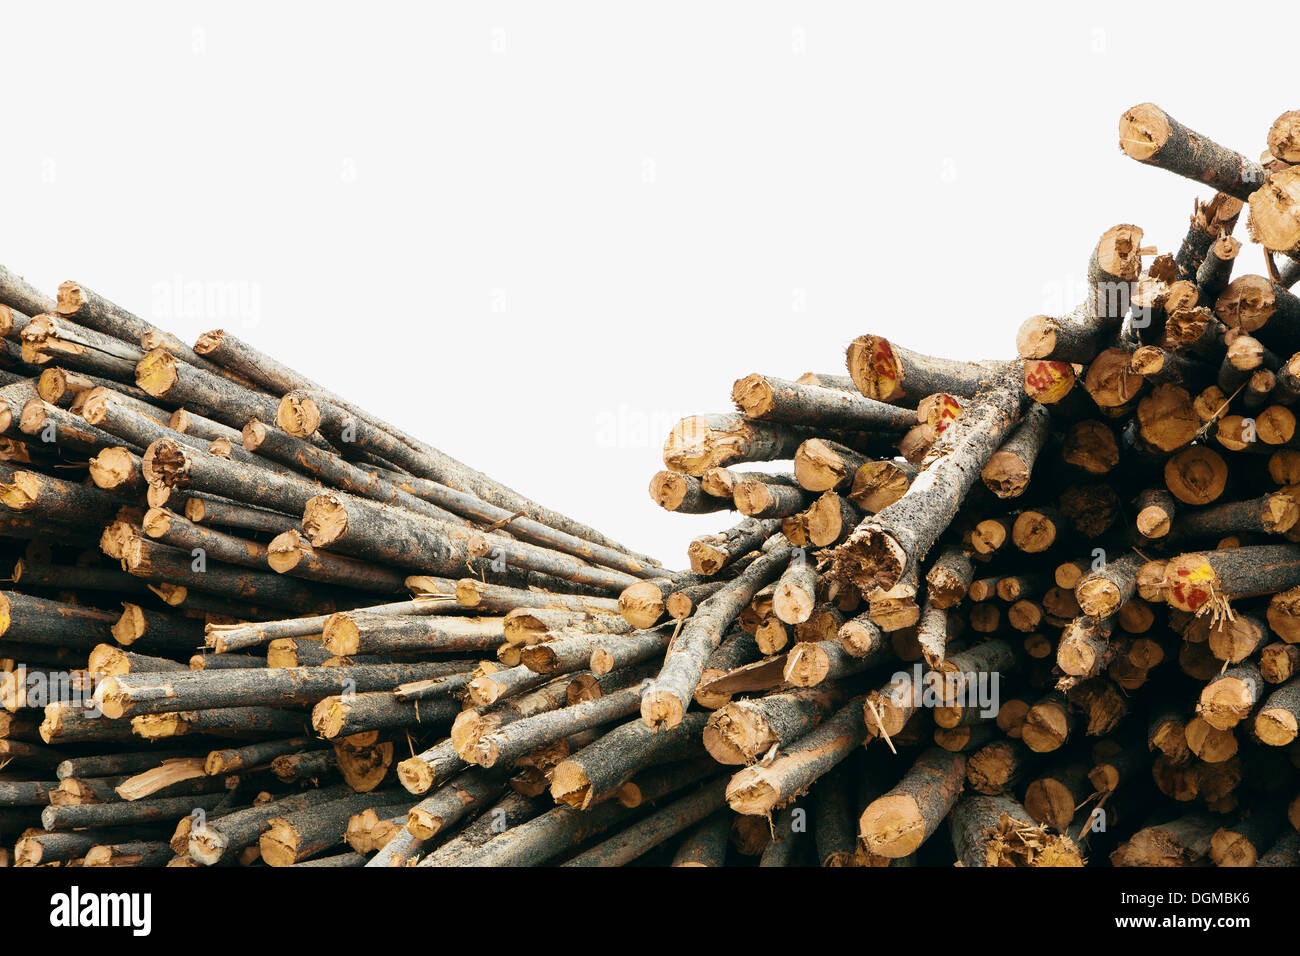 A stack of cut timber logs, Lodge Pole pine trees at a lumber mill. Stock Photo